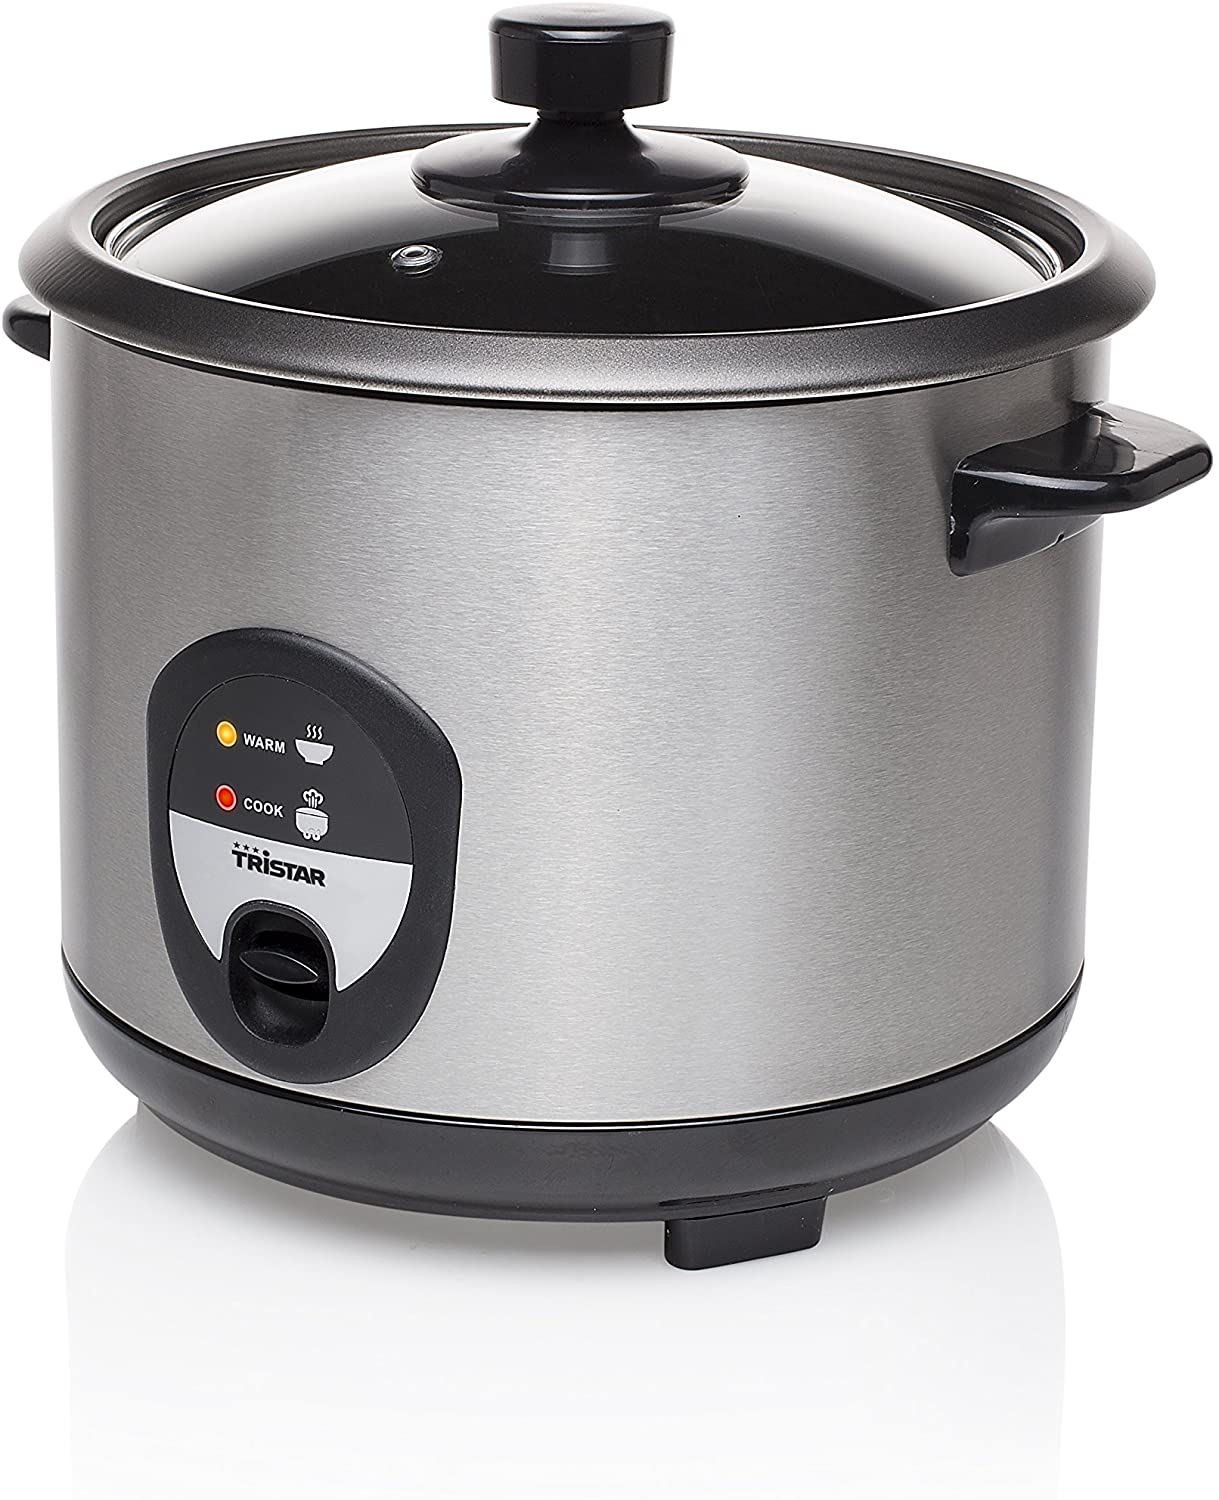 Tristar RK Rice Cooker, Boil Dry Protection, Black Stainless Steel